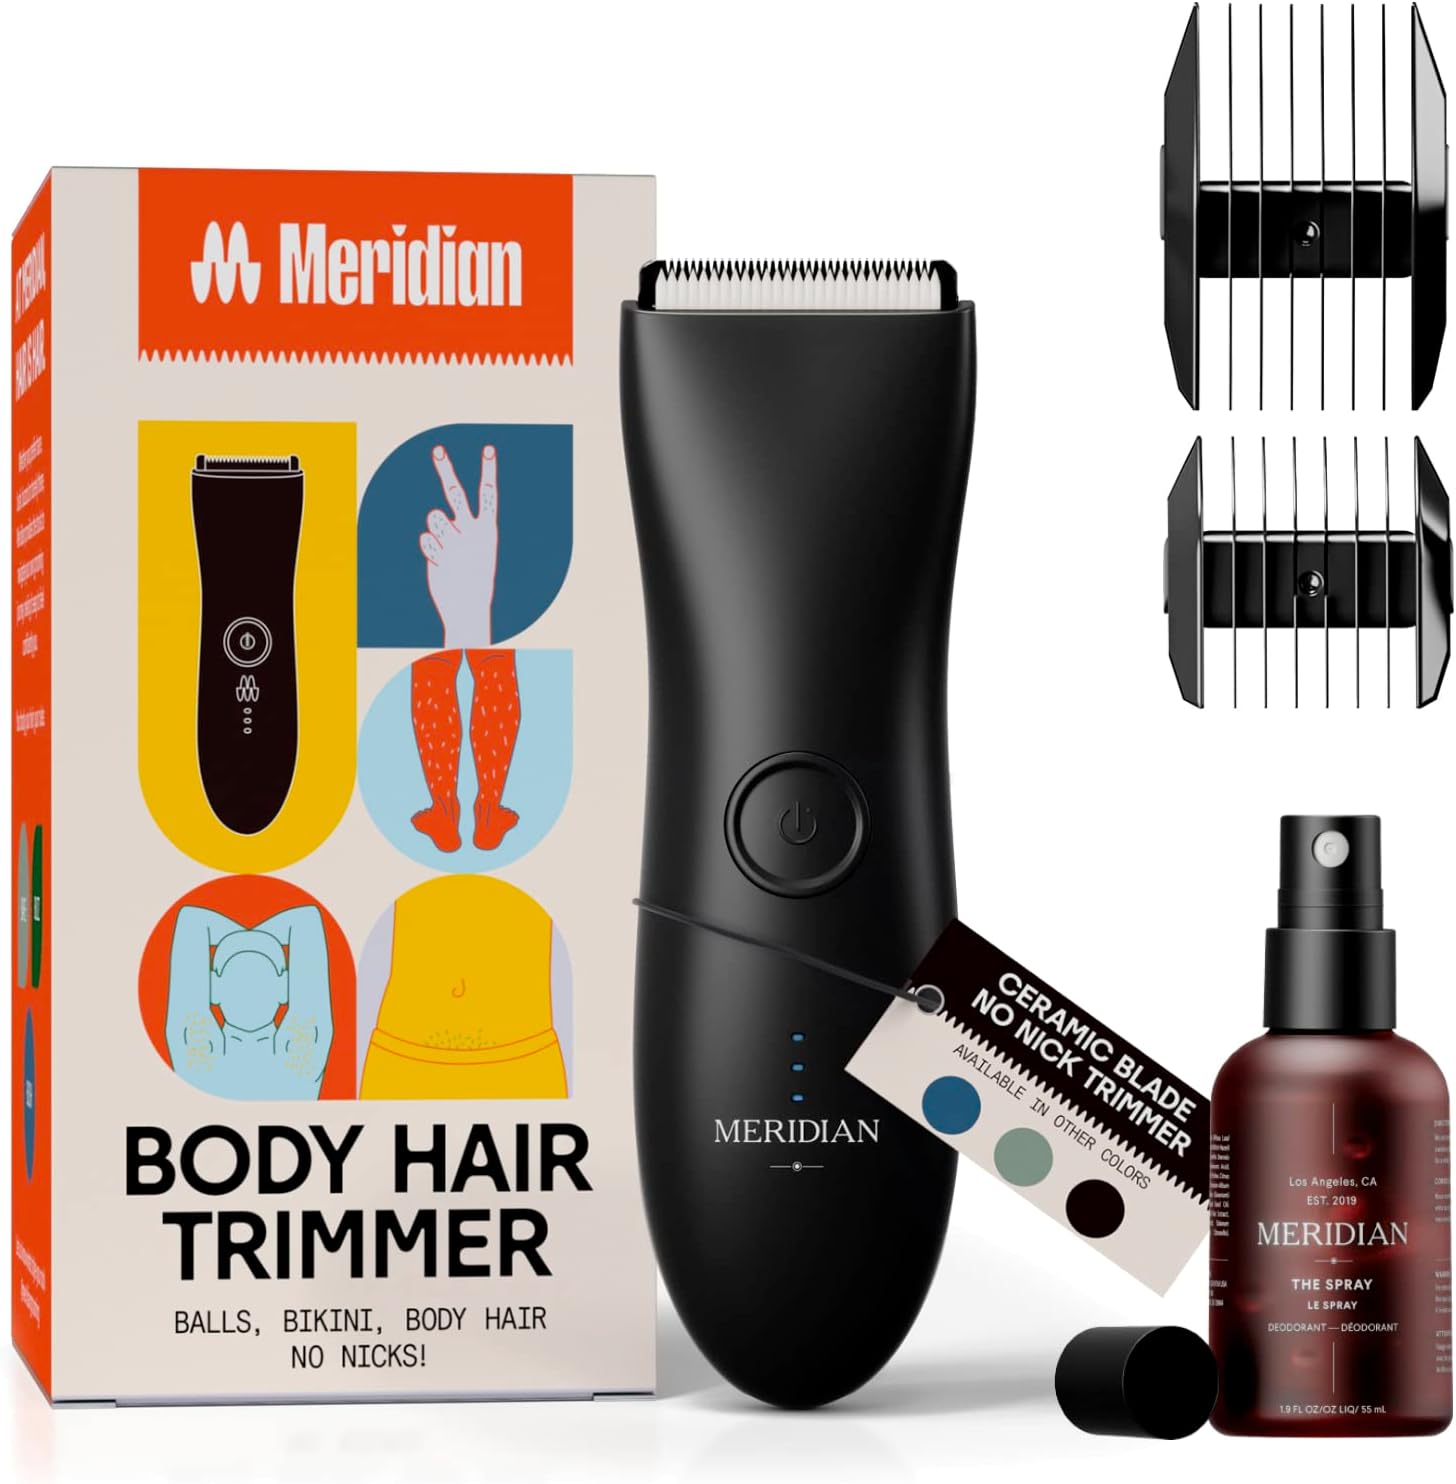 The Complete Package by Meridian: Includes Men’s Waterproof Electric Below-The-Belt Trimmer and The Spray (50 mL) - Features Ceramic Blades and Sensitive Shave Tech (Onyx)